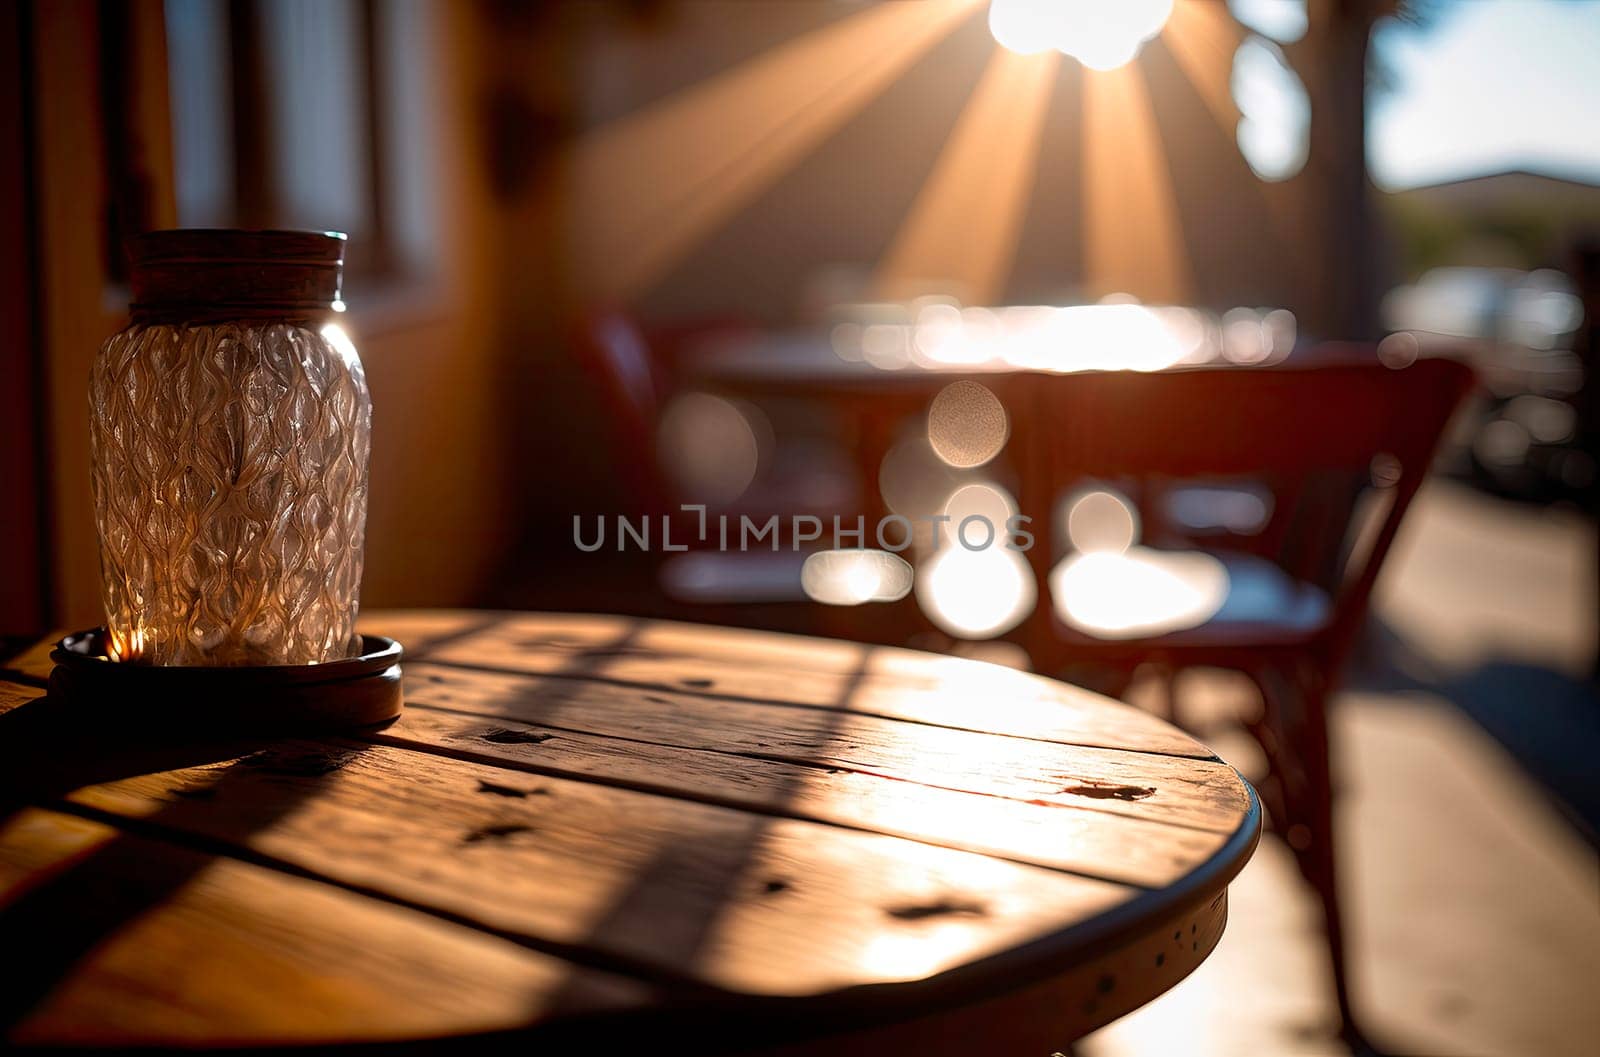 a wooden table in the foreground and a beam of light. by yanadjana